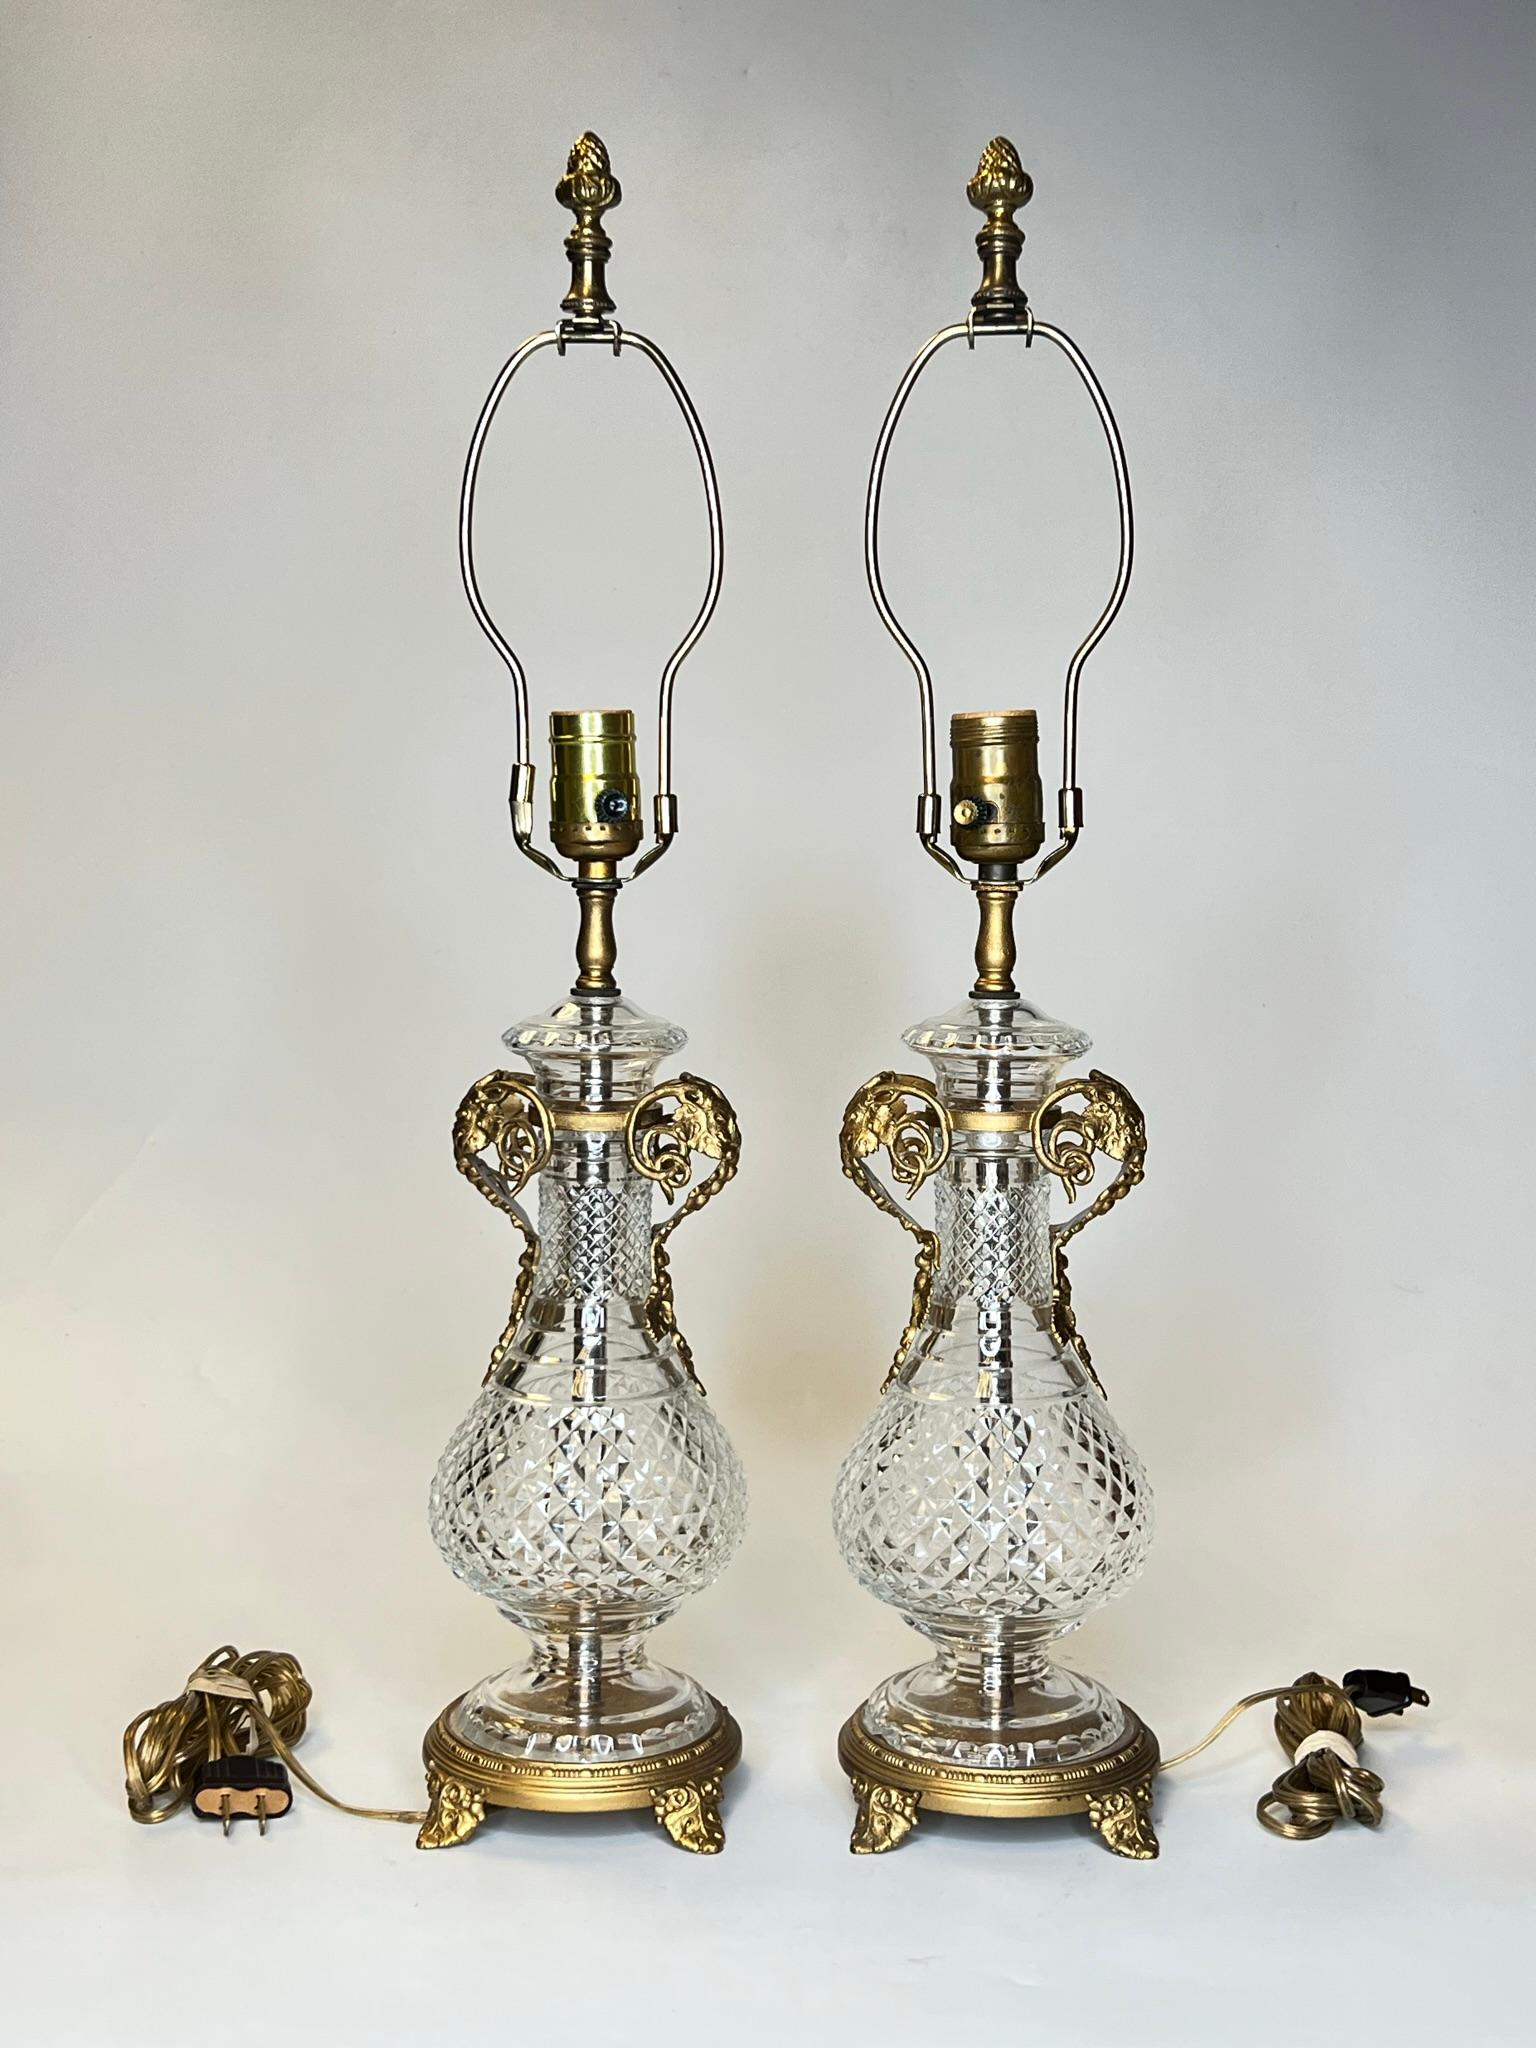 Pair of antique table lamps from the Mutual Sunset Lamp Company, of urn form, crafted from molded glass with foliate gilt bronze handles and pedestals.  Ready for use.